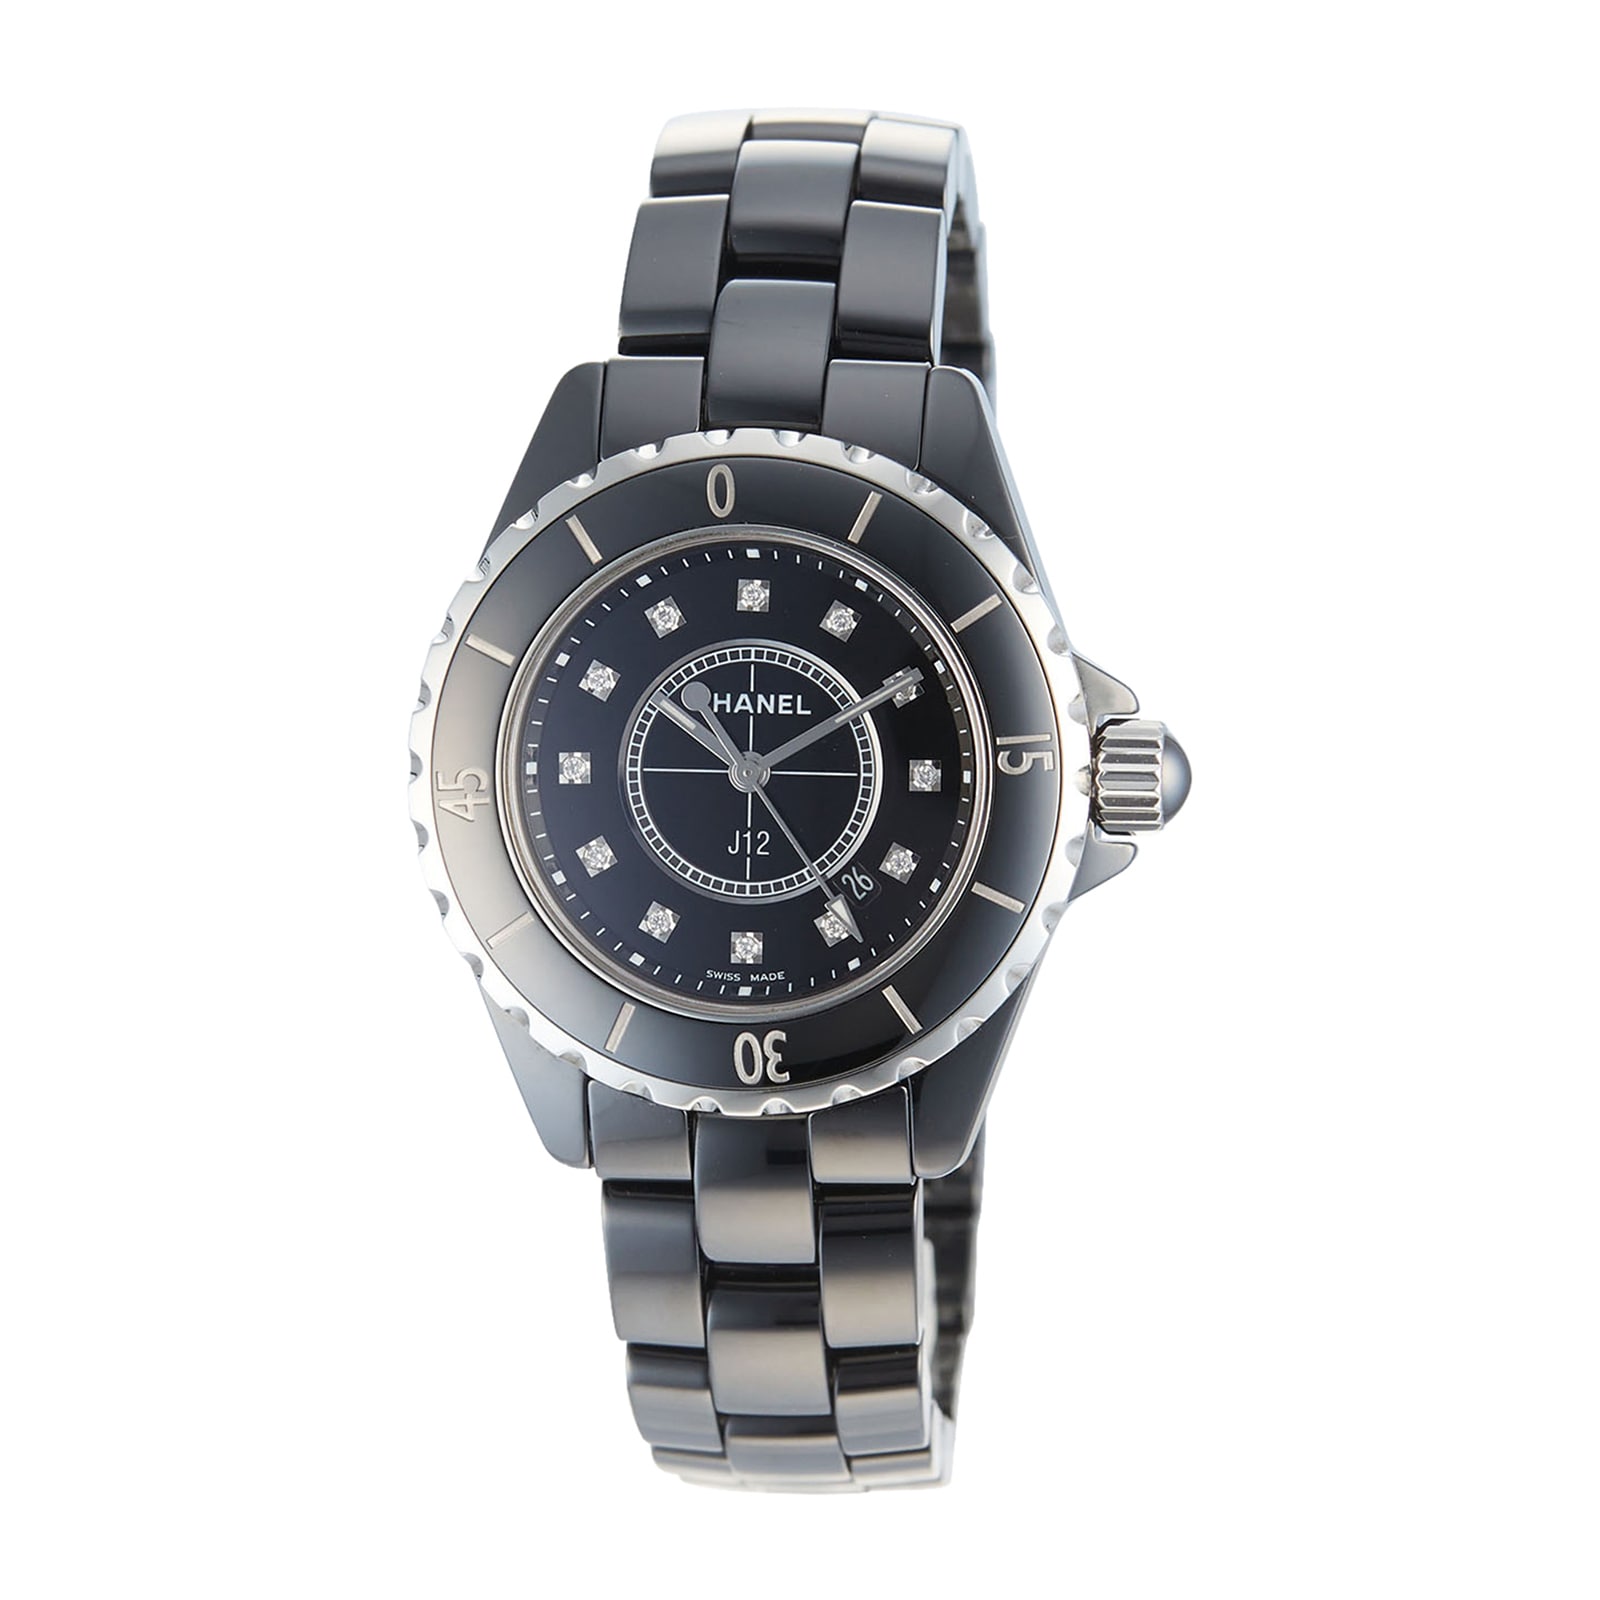 Chanel J12 White Ceramic Watch H5700 for 6200  Black Tag Watches